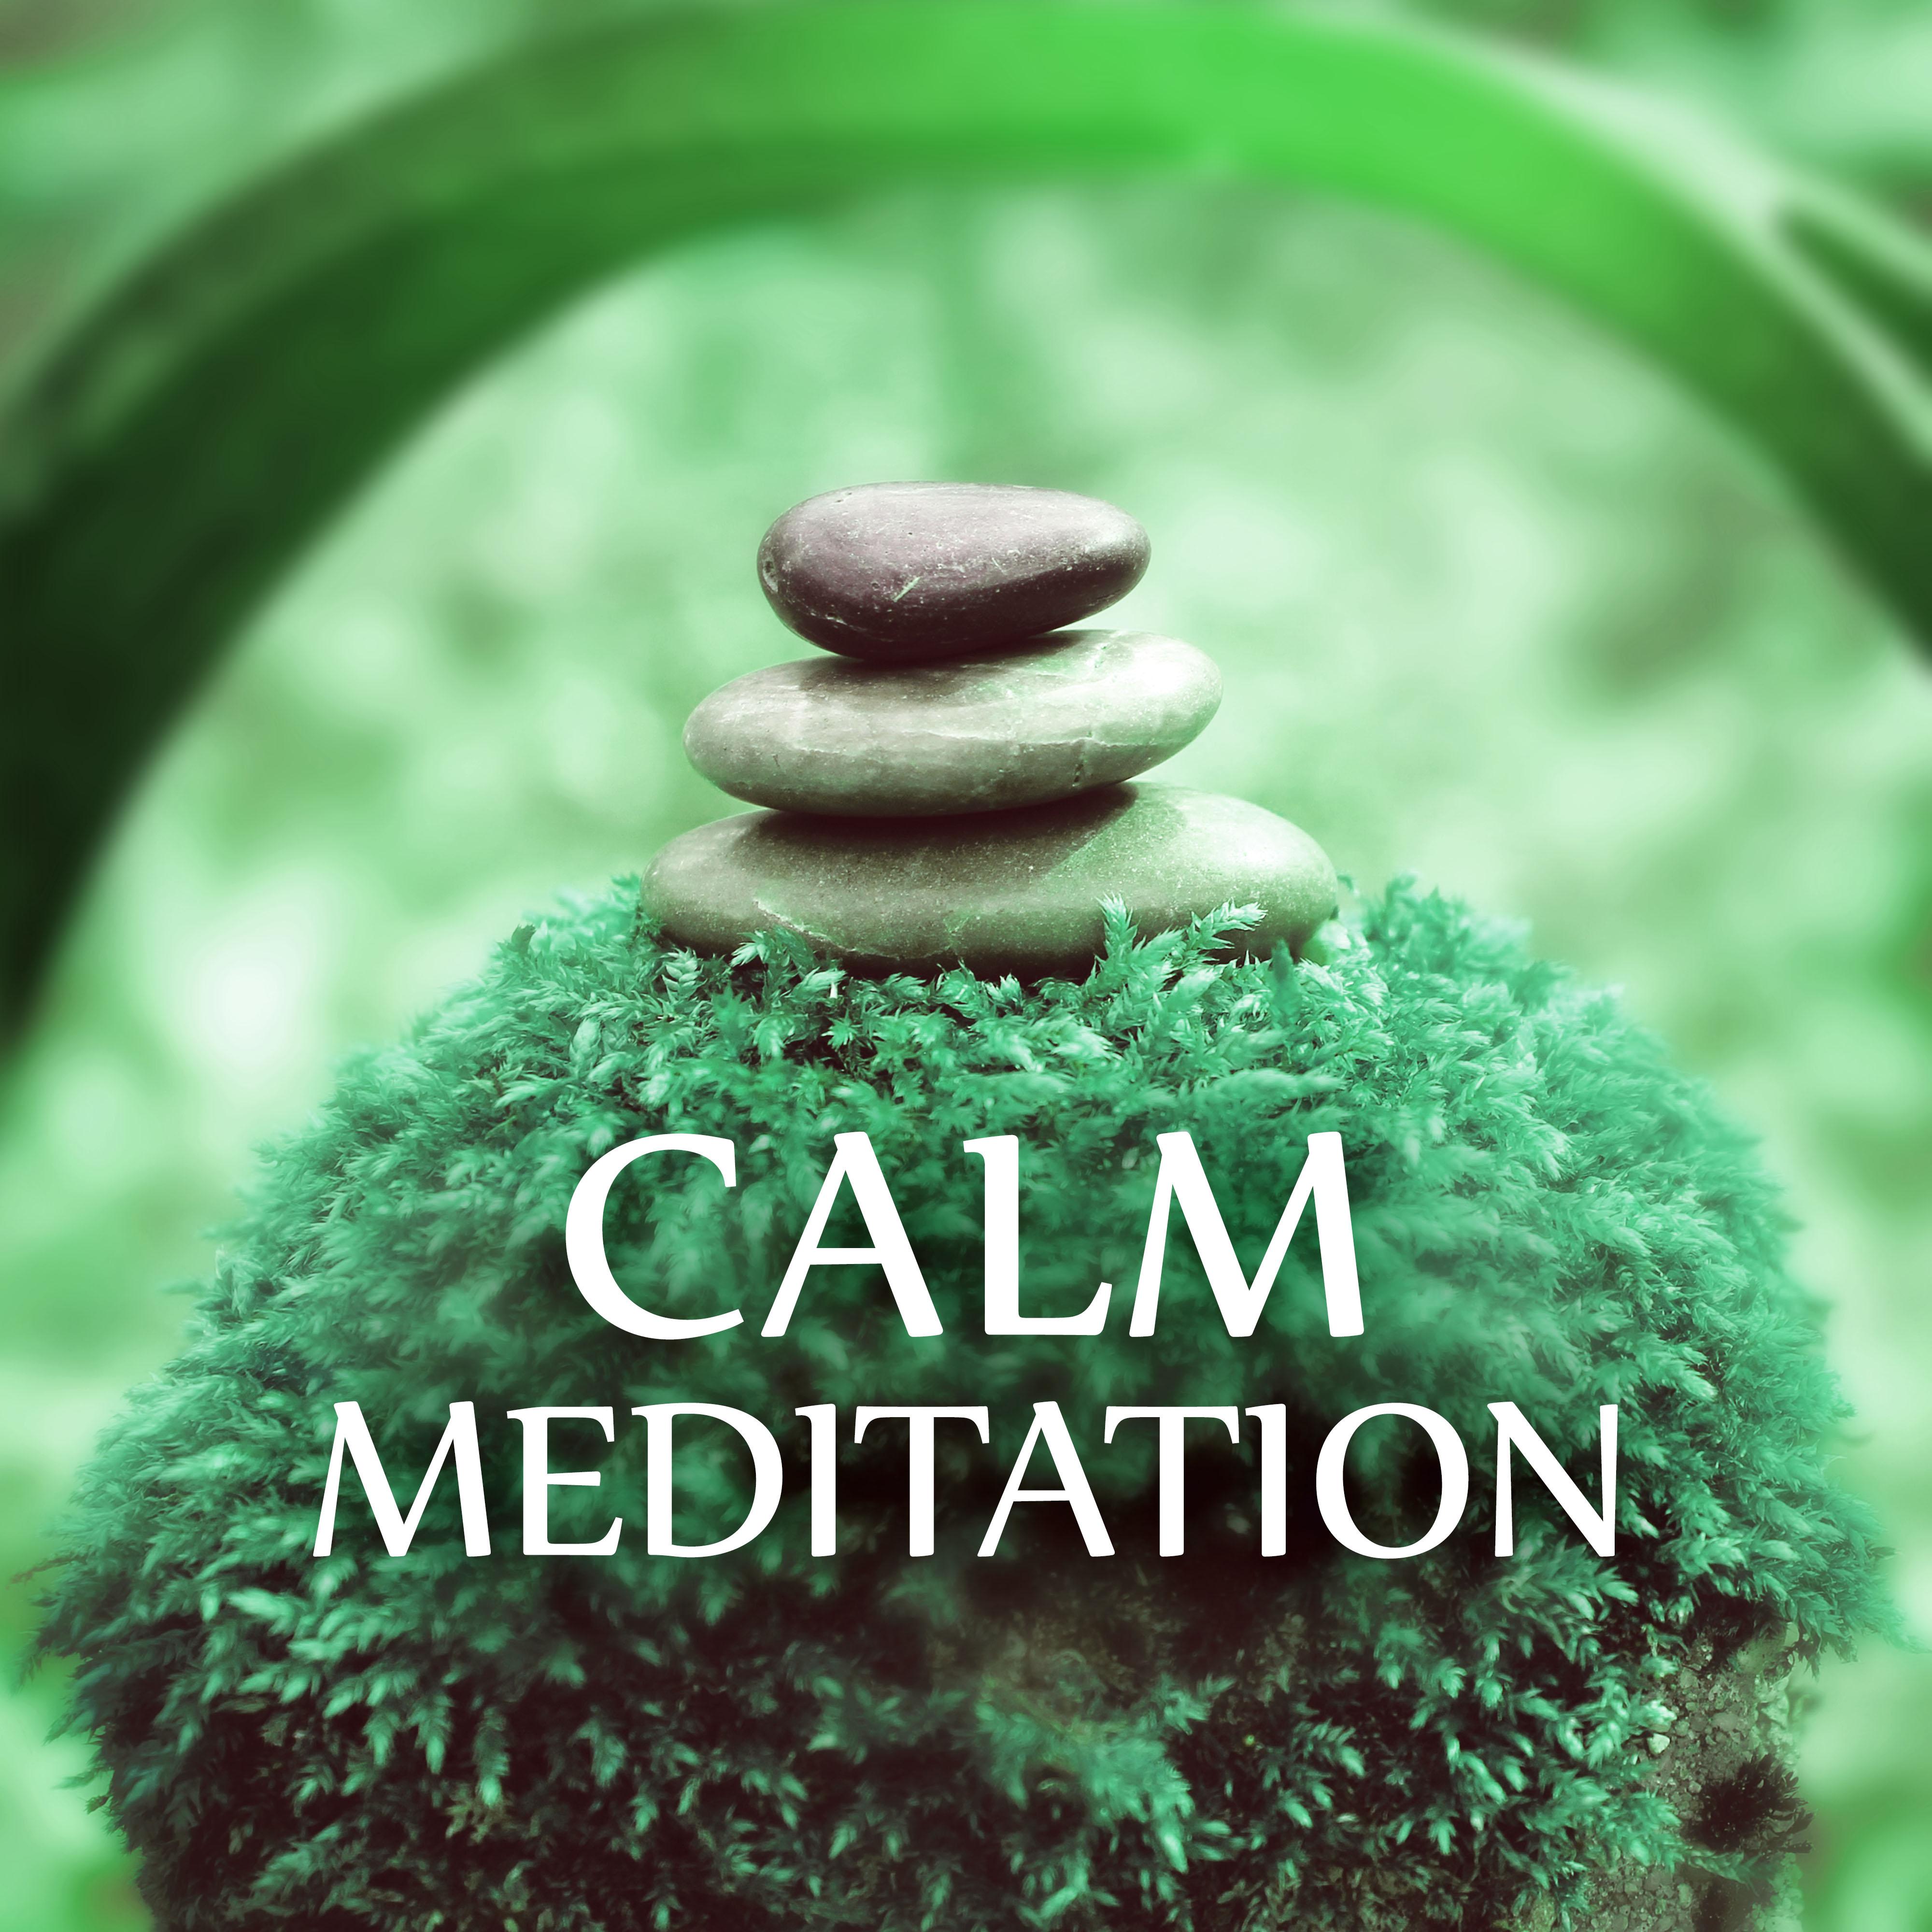 Calm Meditation - Calming Bedtime Music, Relaxation, Soothing Sounds, White Noise, Inner Peace, Nature Sounds